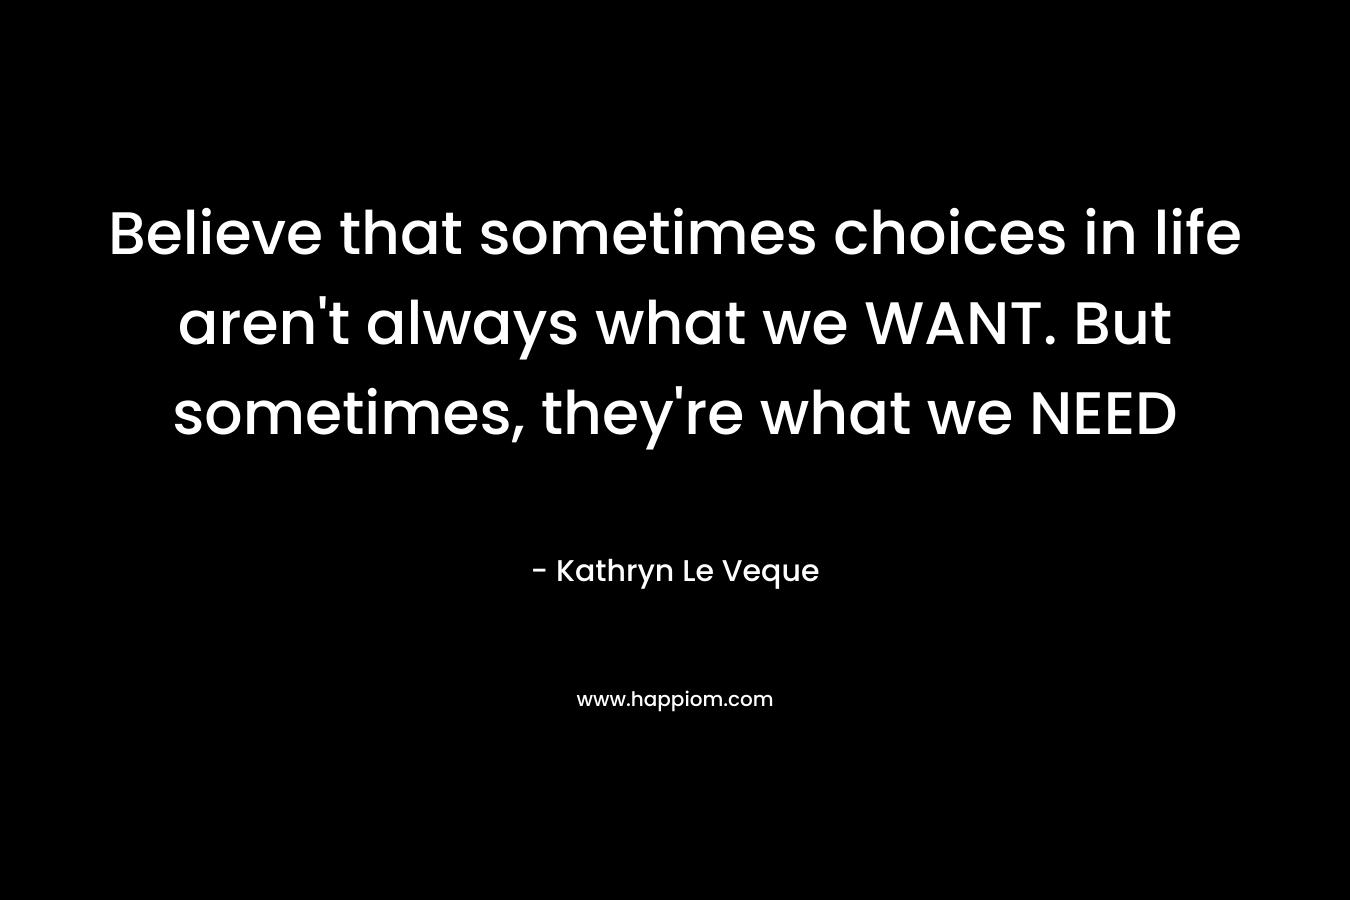 Believe that sometimes choices in life aren't always what we WANT. But sometimes, they're what we NEED